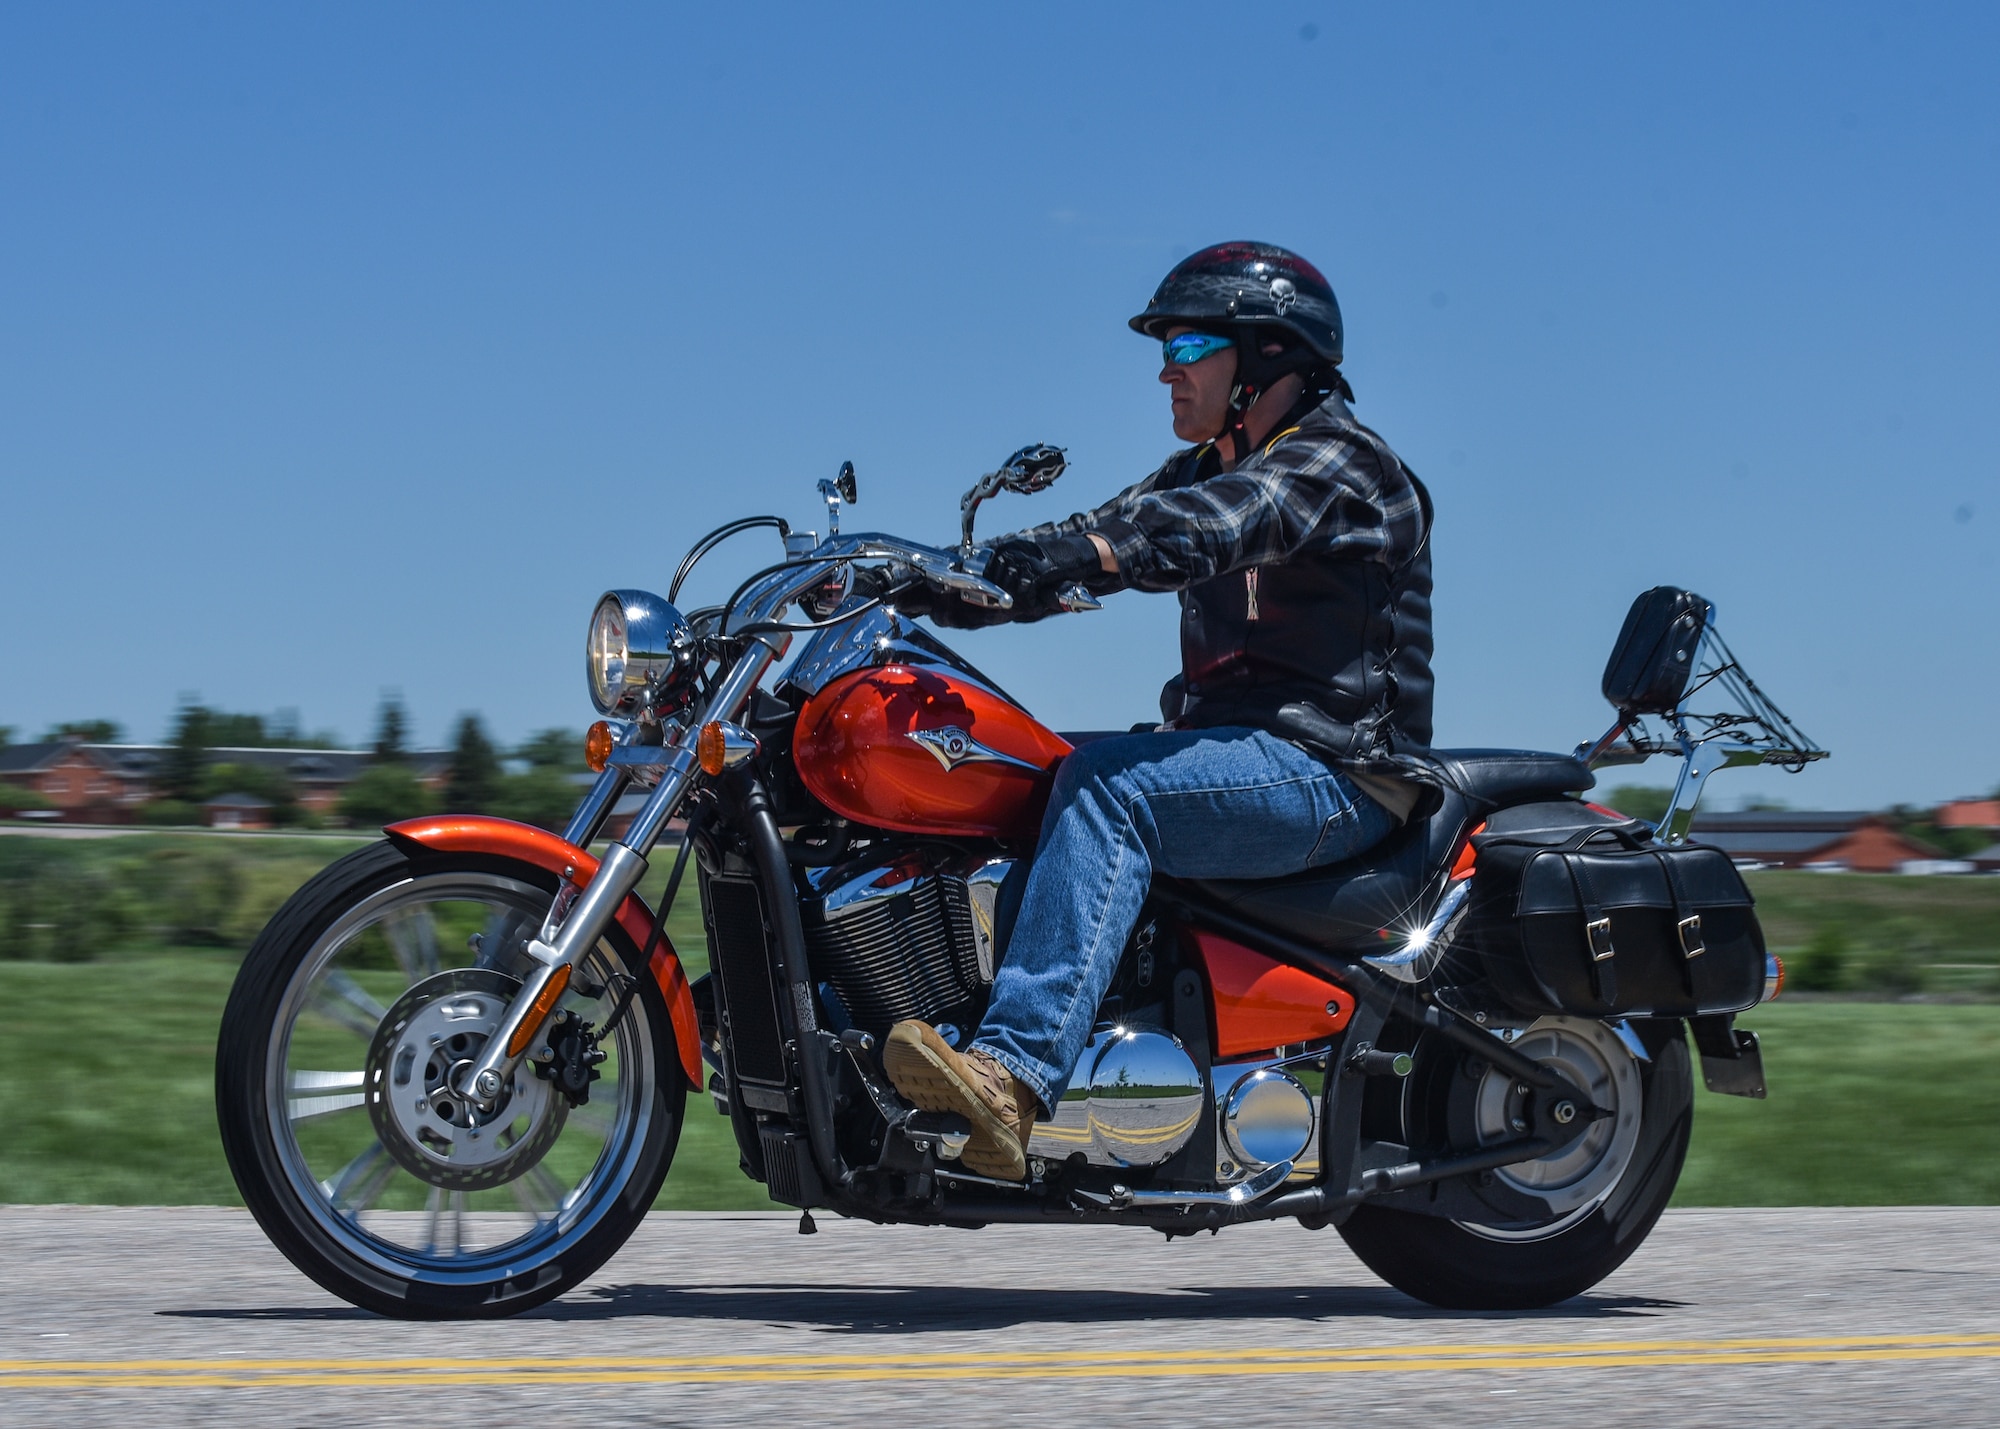 Chief Master Sgt. Beau Jones, 90th Missile Maintenance Squadron maintenance advisor, rides his motorcycle down the road June 20, 2019, on F.E. Warren Air Force Base, Wyo. Due to his vast number of hobbies and talents Jones is commonly called the most interesting Chief at F.E. Warren by his peers. (U.S. Air Force photo by Senior Airman Braydon Williams)